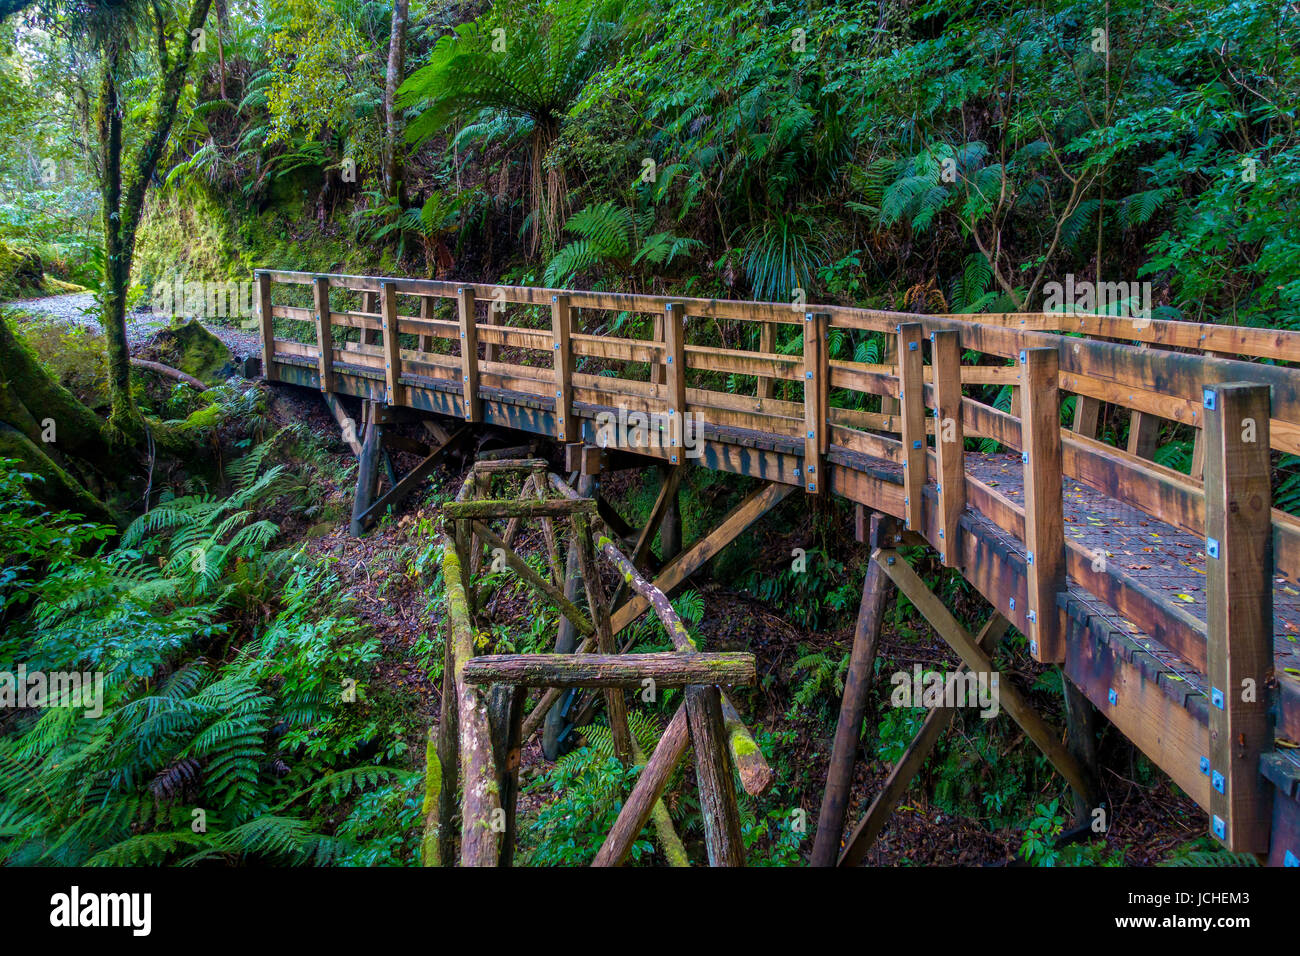 Bridge Inside Of Dense Temperate Rainforest With Fern Trees In South